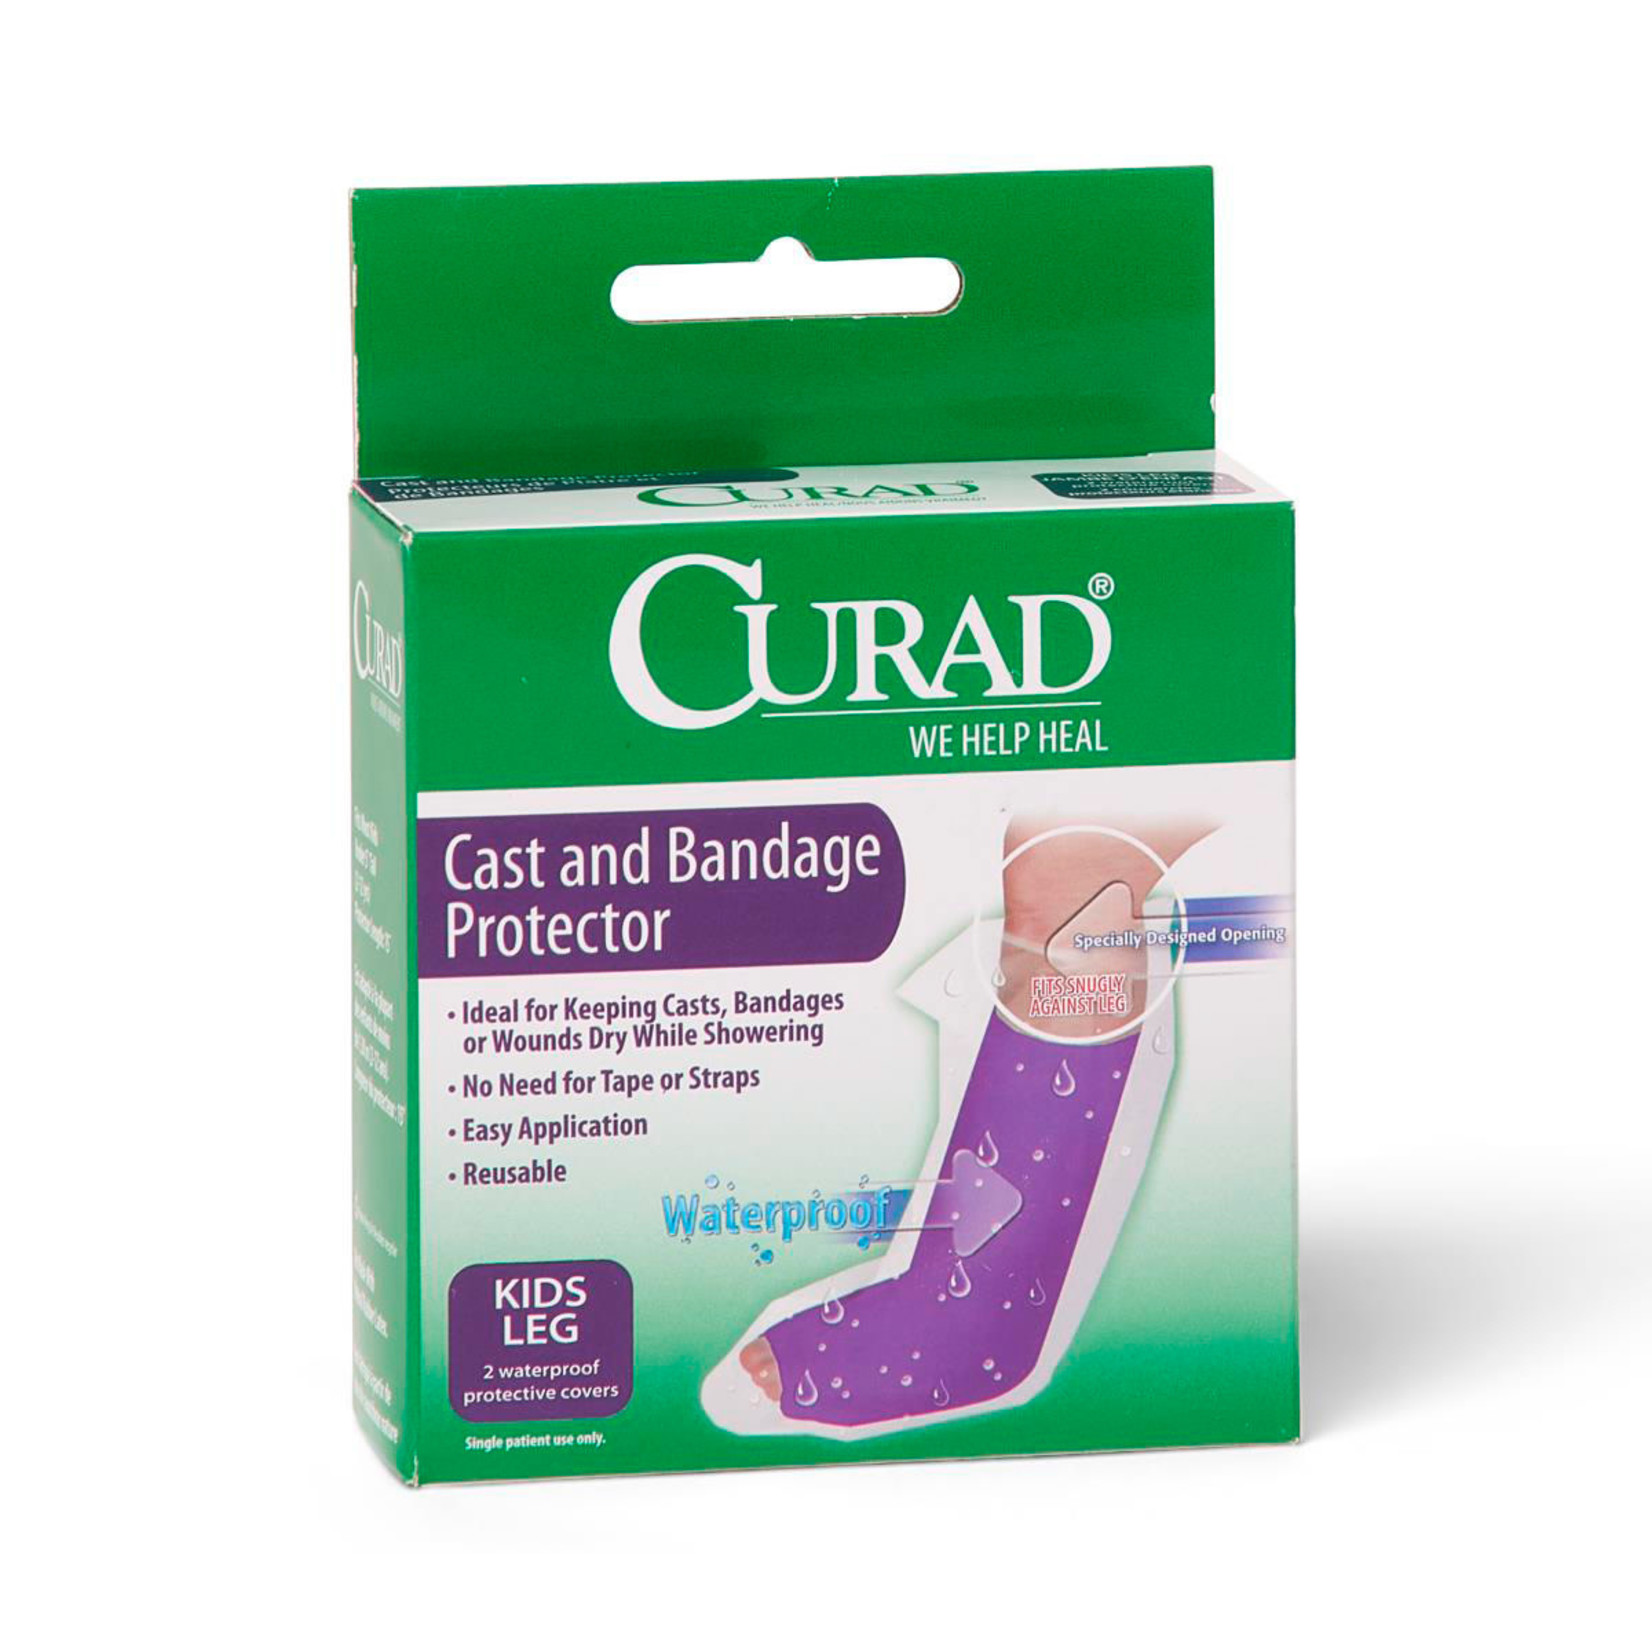 Curad Cast and Bandage Protector